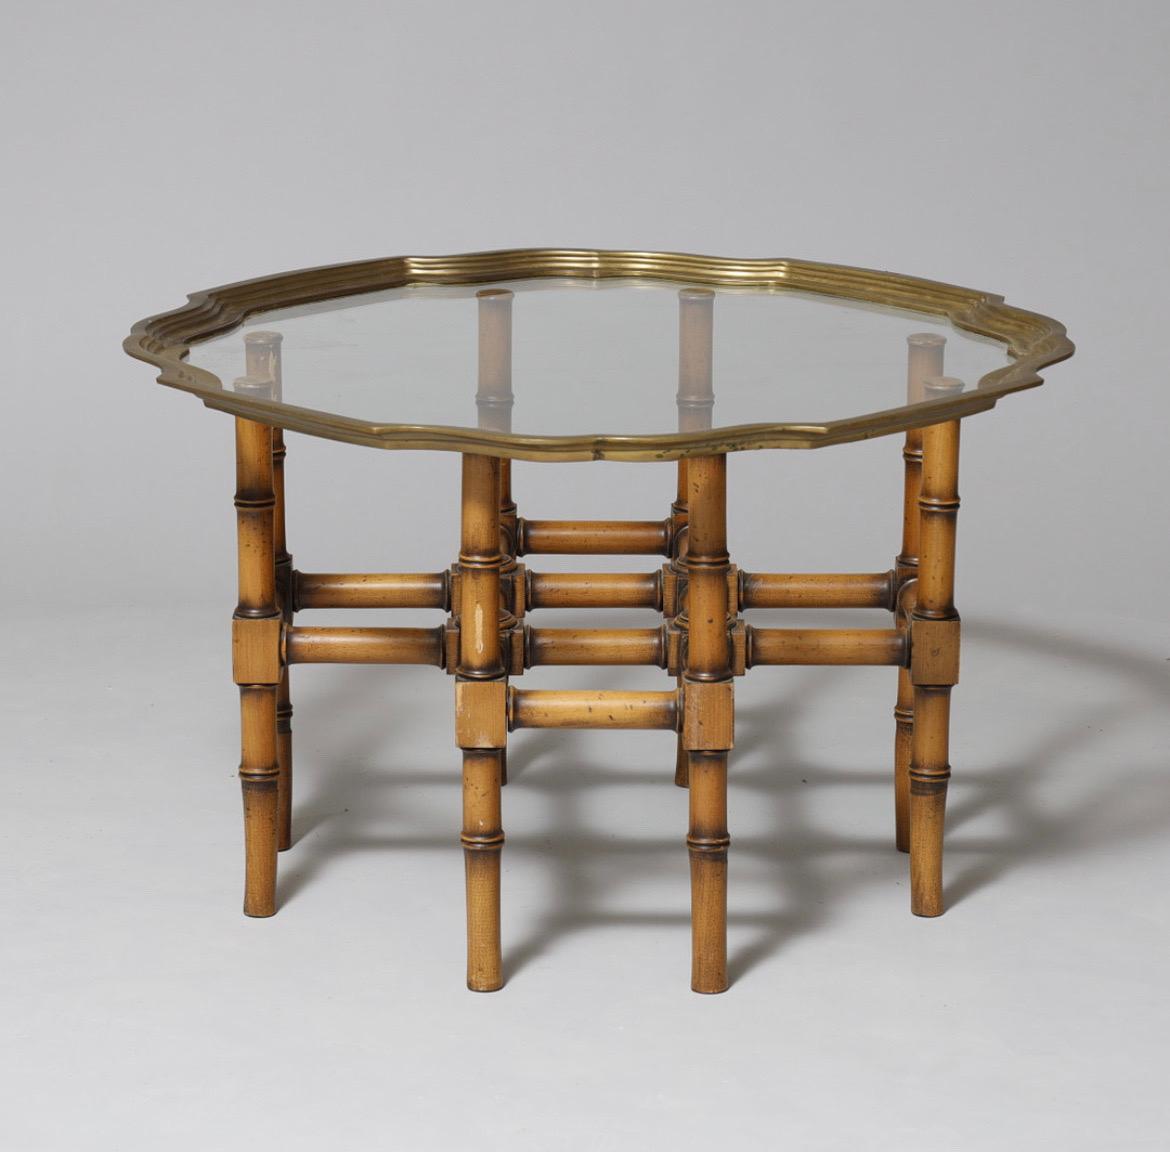 Scandinavian Modern 1960s Lysberg, Hansen & Therp Faux Bamboo Coffee Table with Profiled Brass Edge